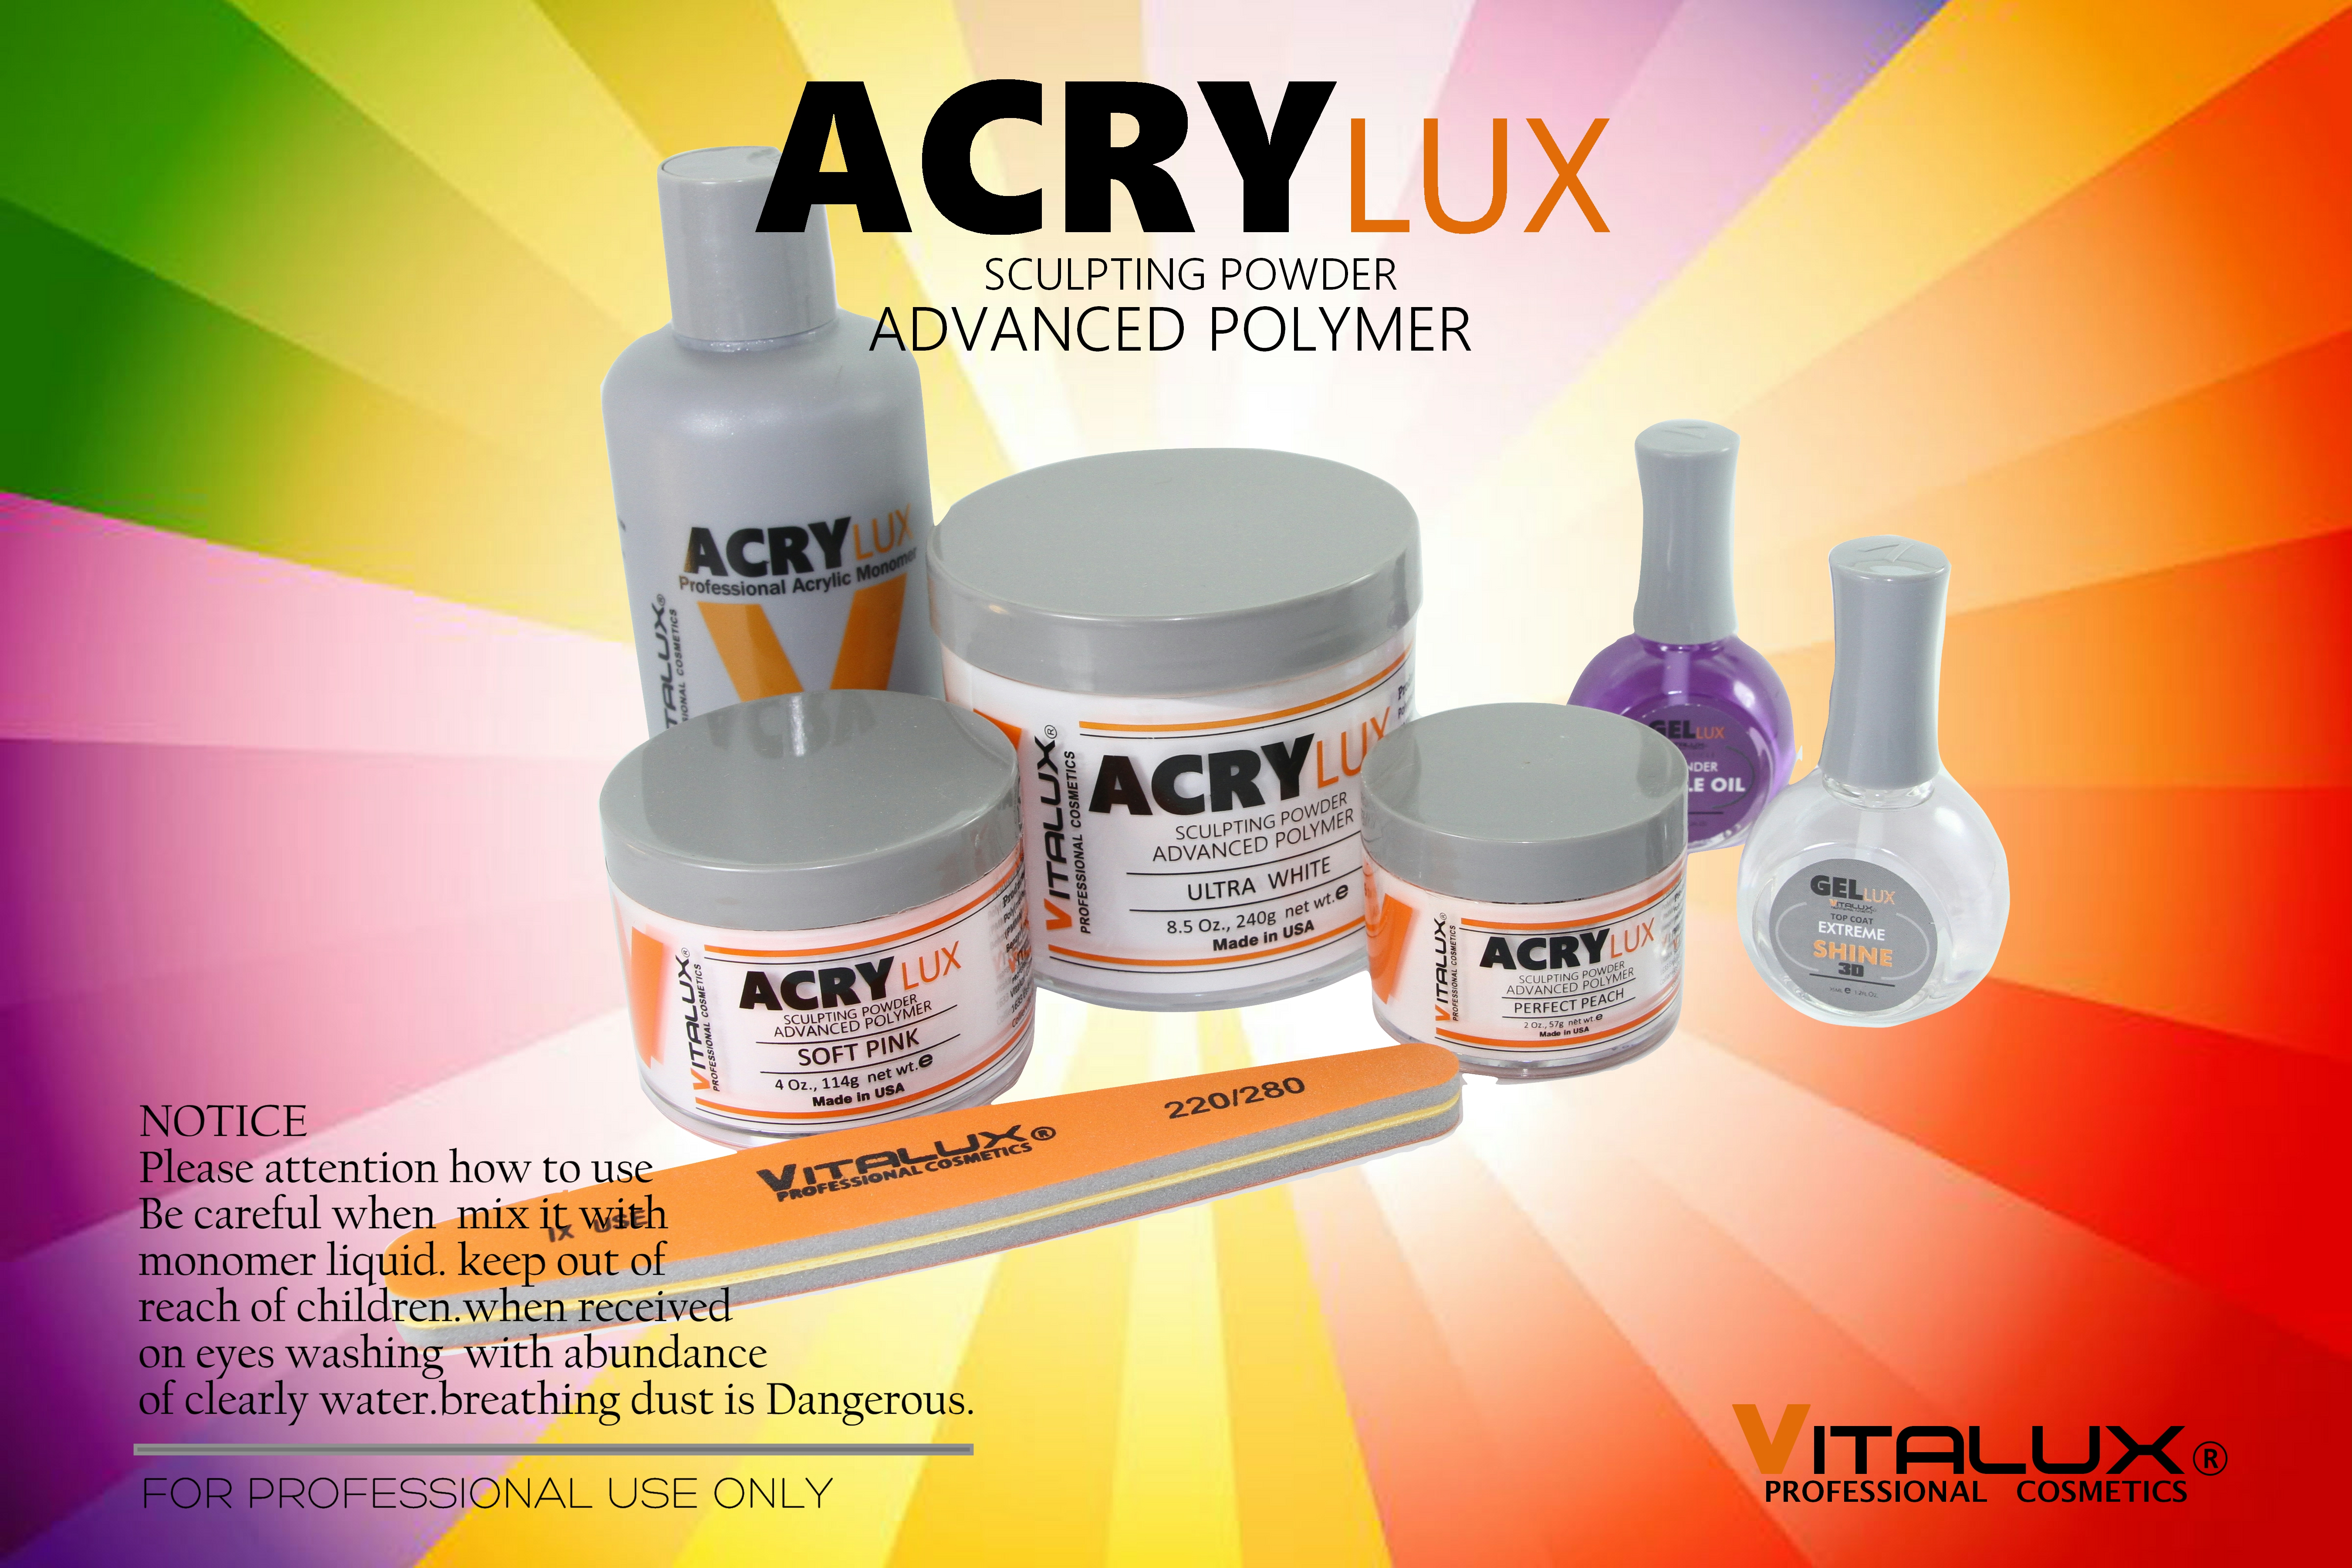 ACRY LUX